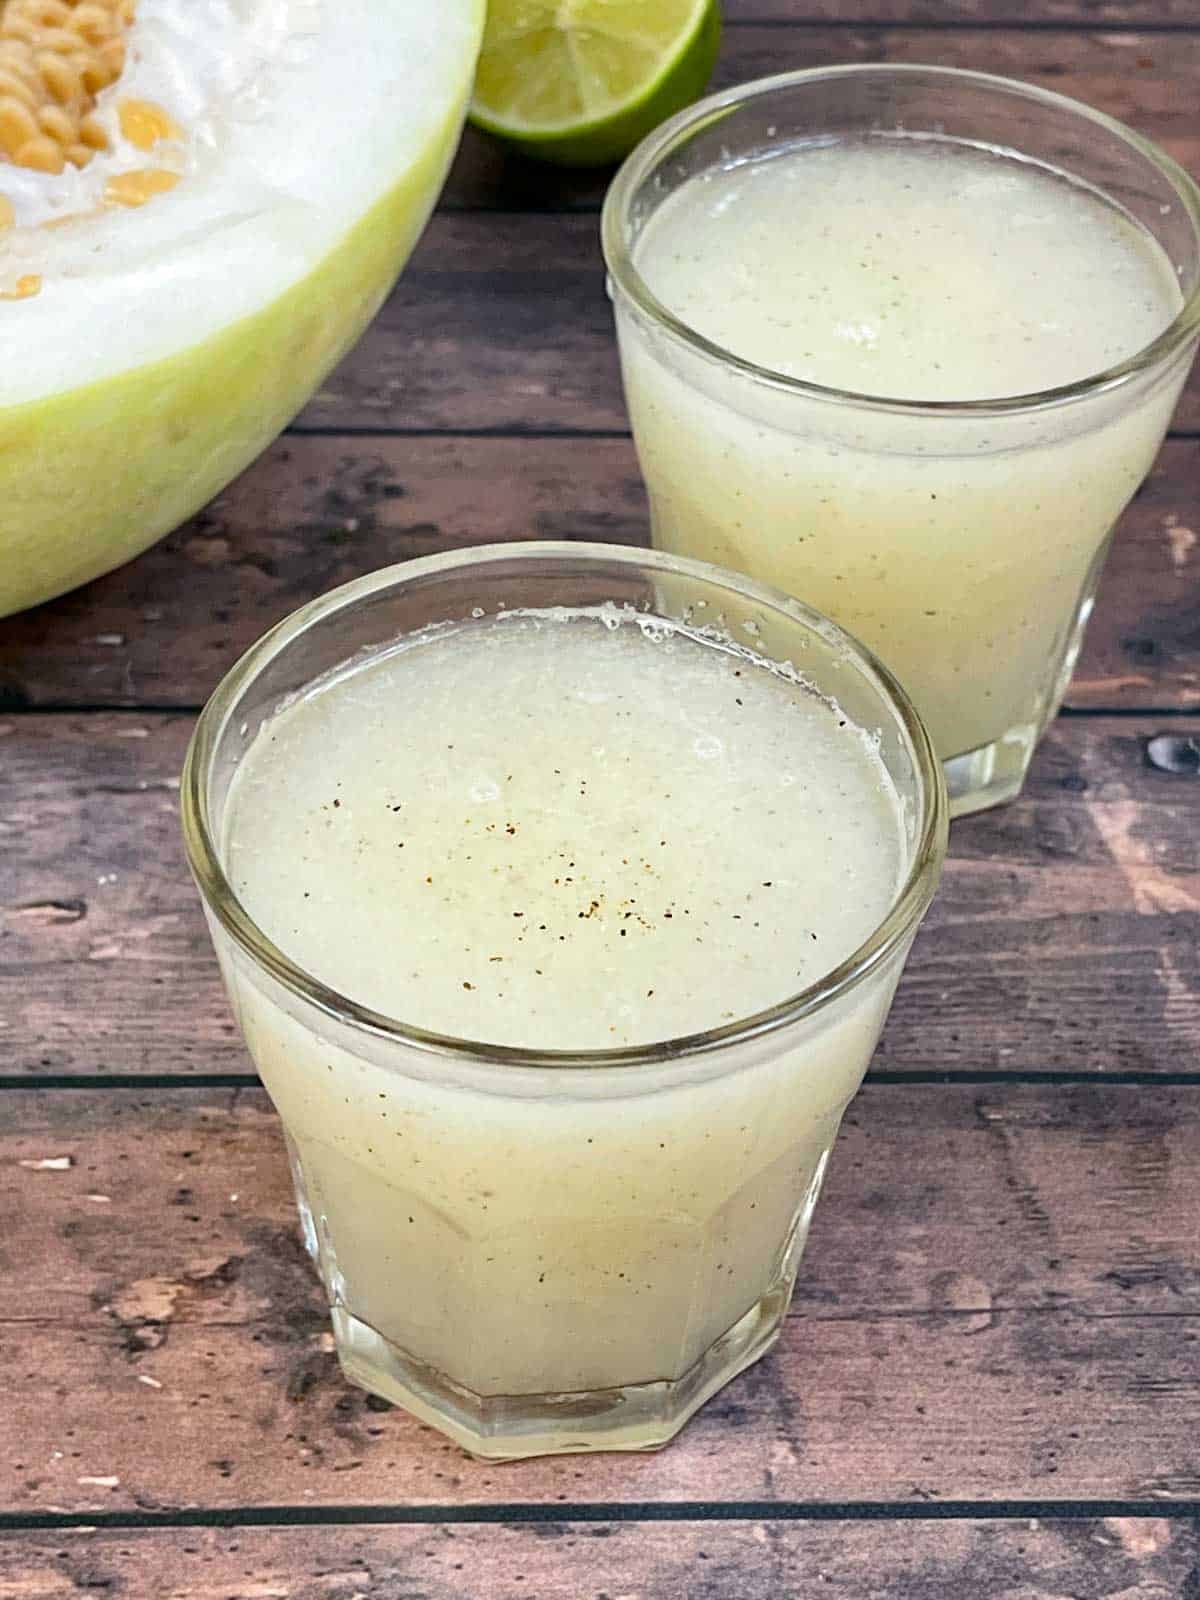 ash gourd juice (winter melon juice) served in a juice glass with a piece of ash gourd on the side